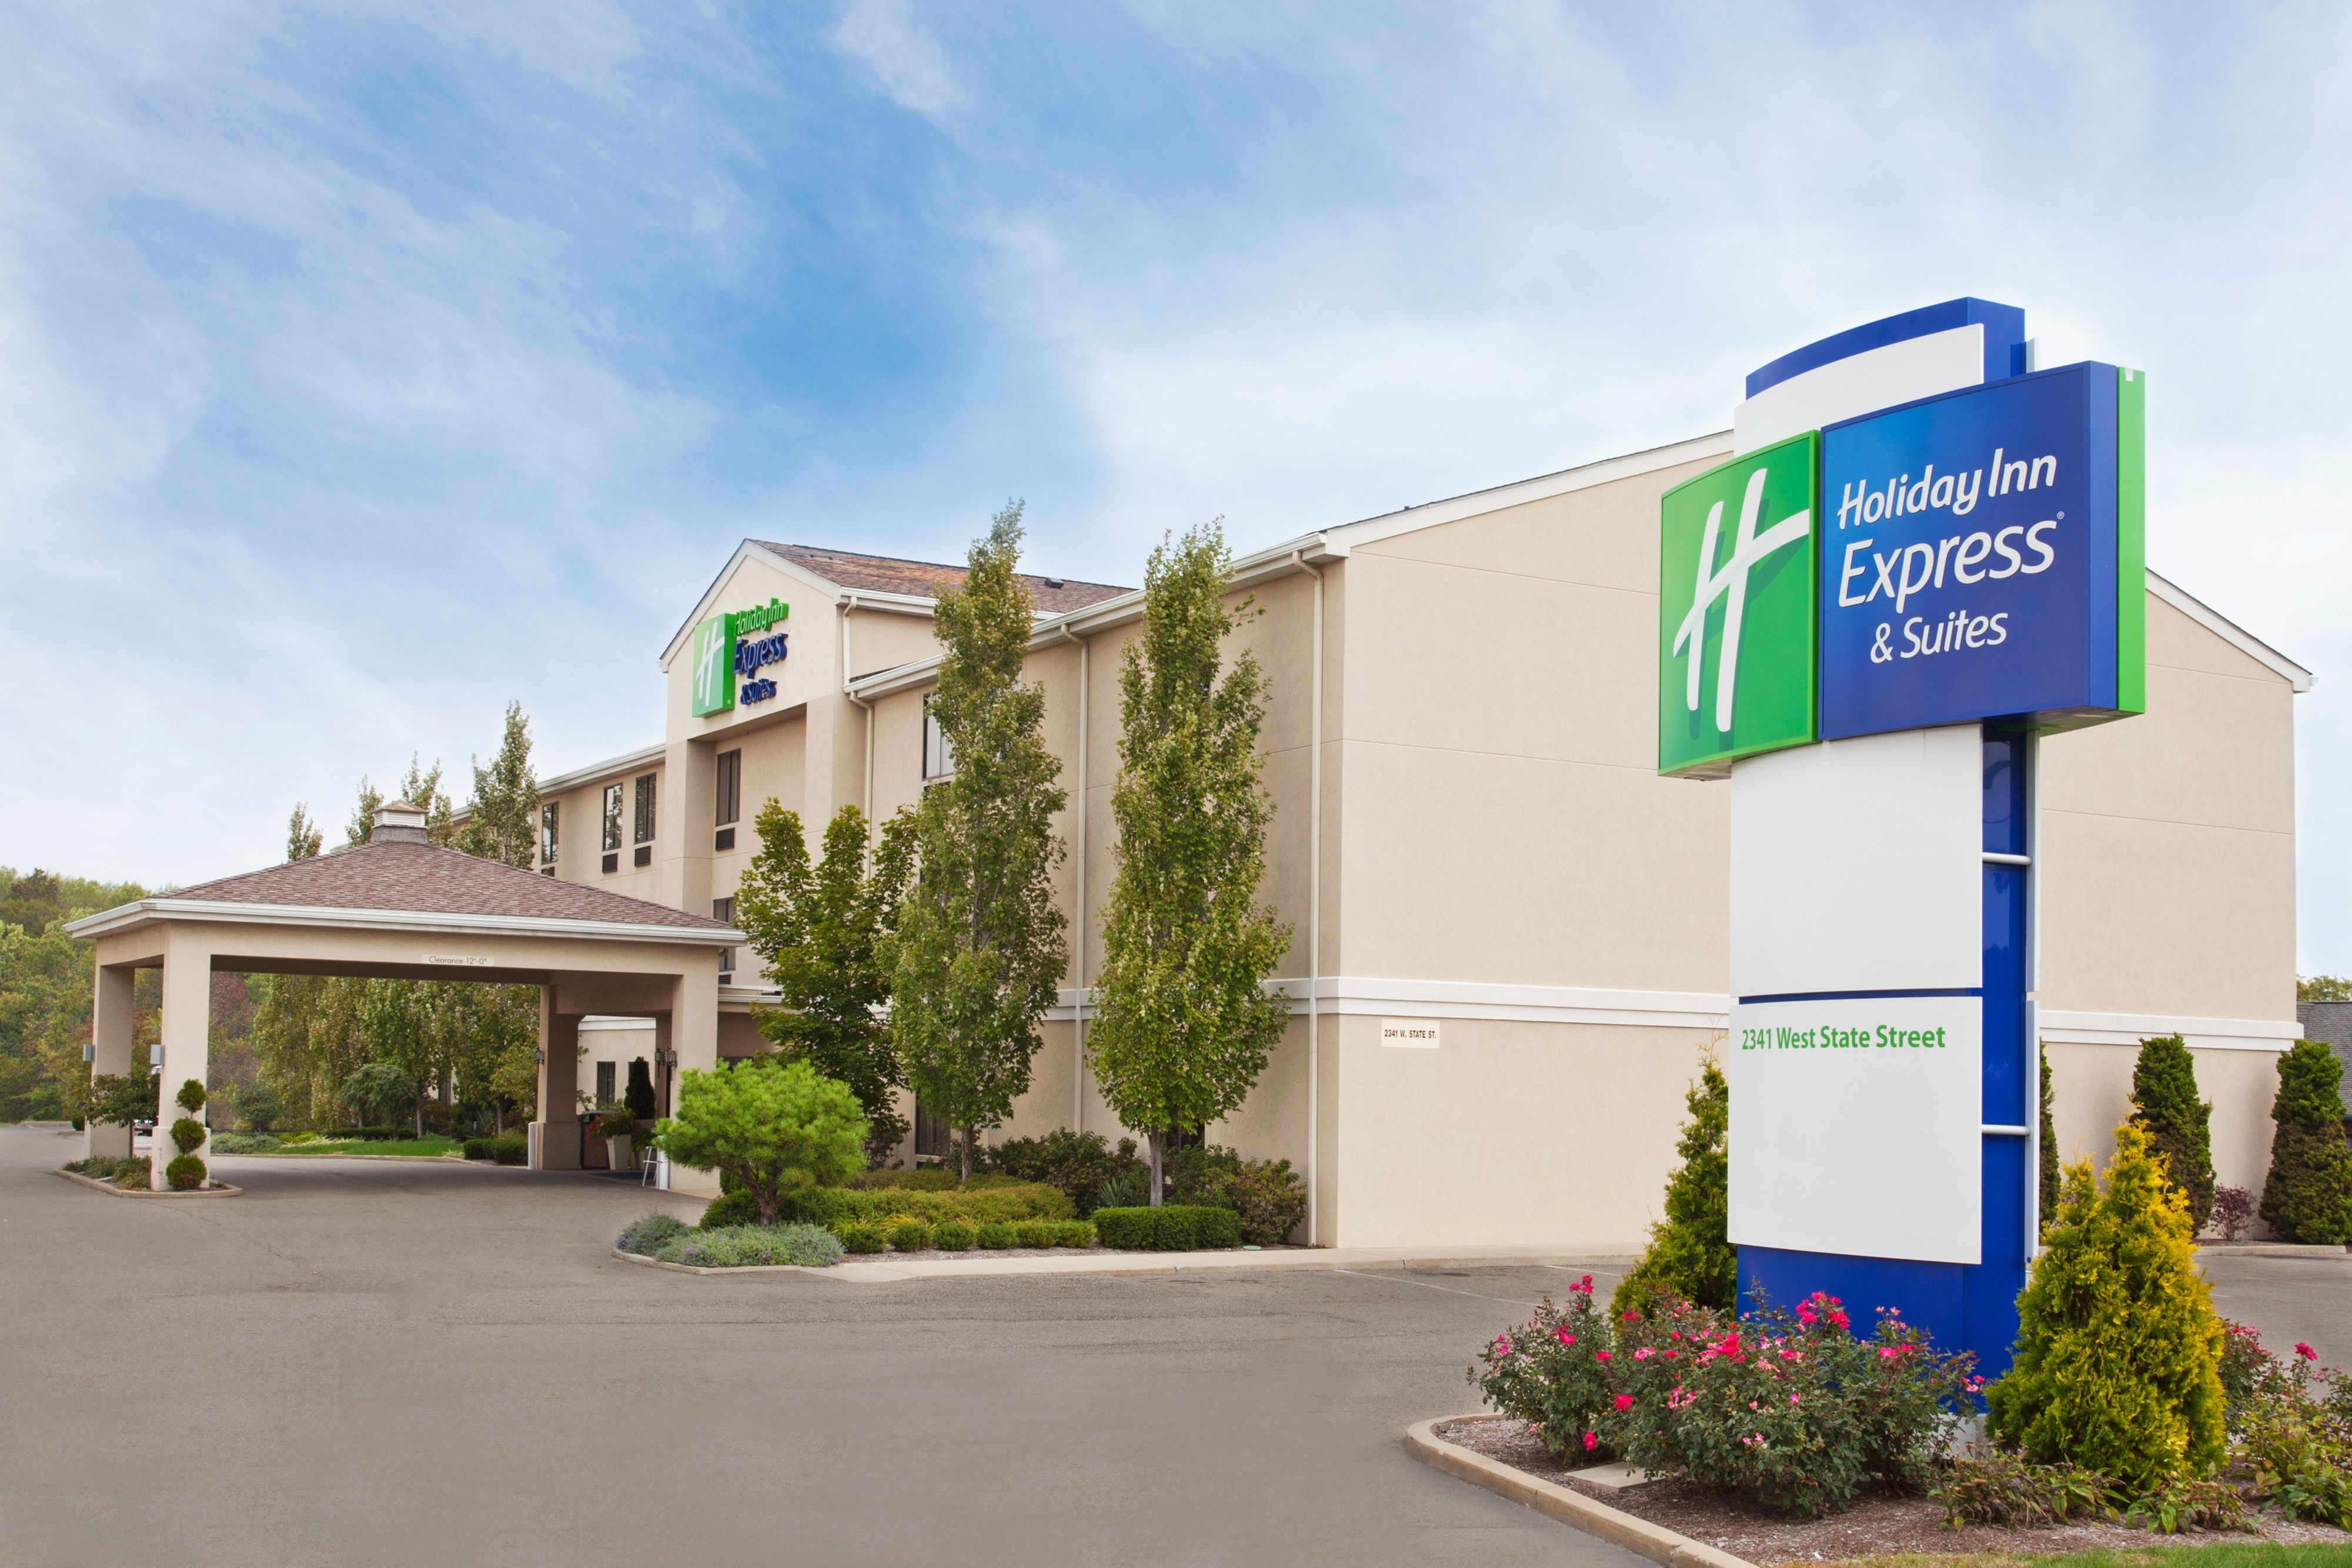 holiday-inn-express-and-suites-alliance-4278955352-original.jpg